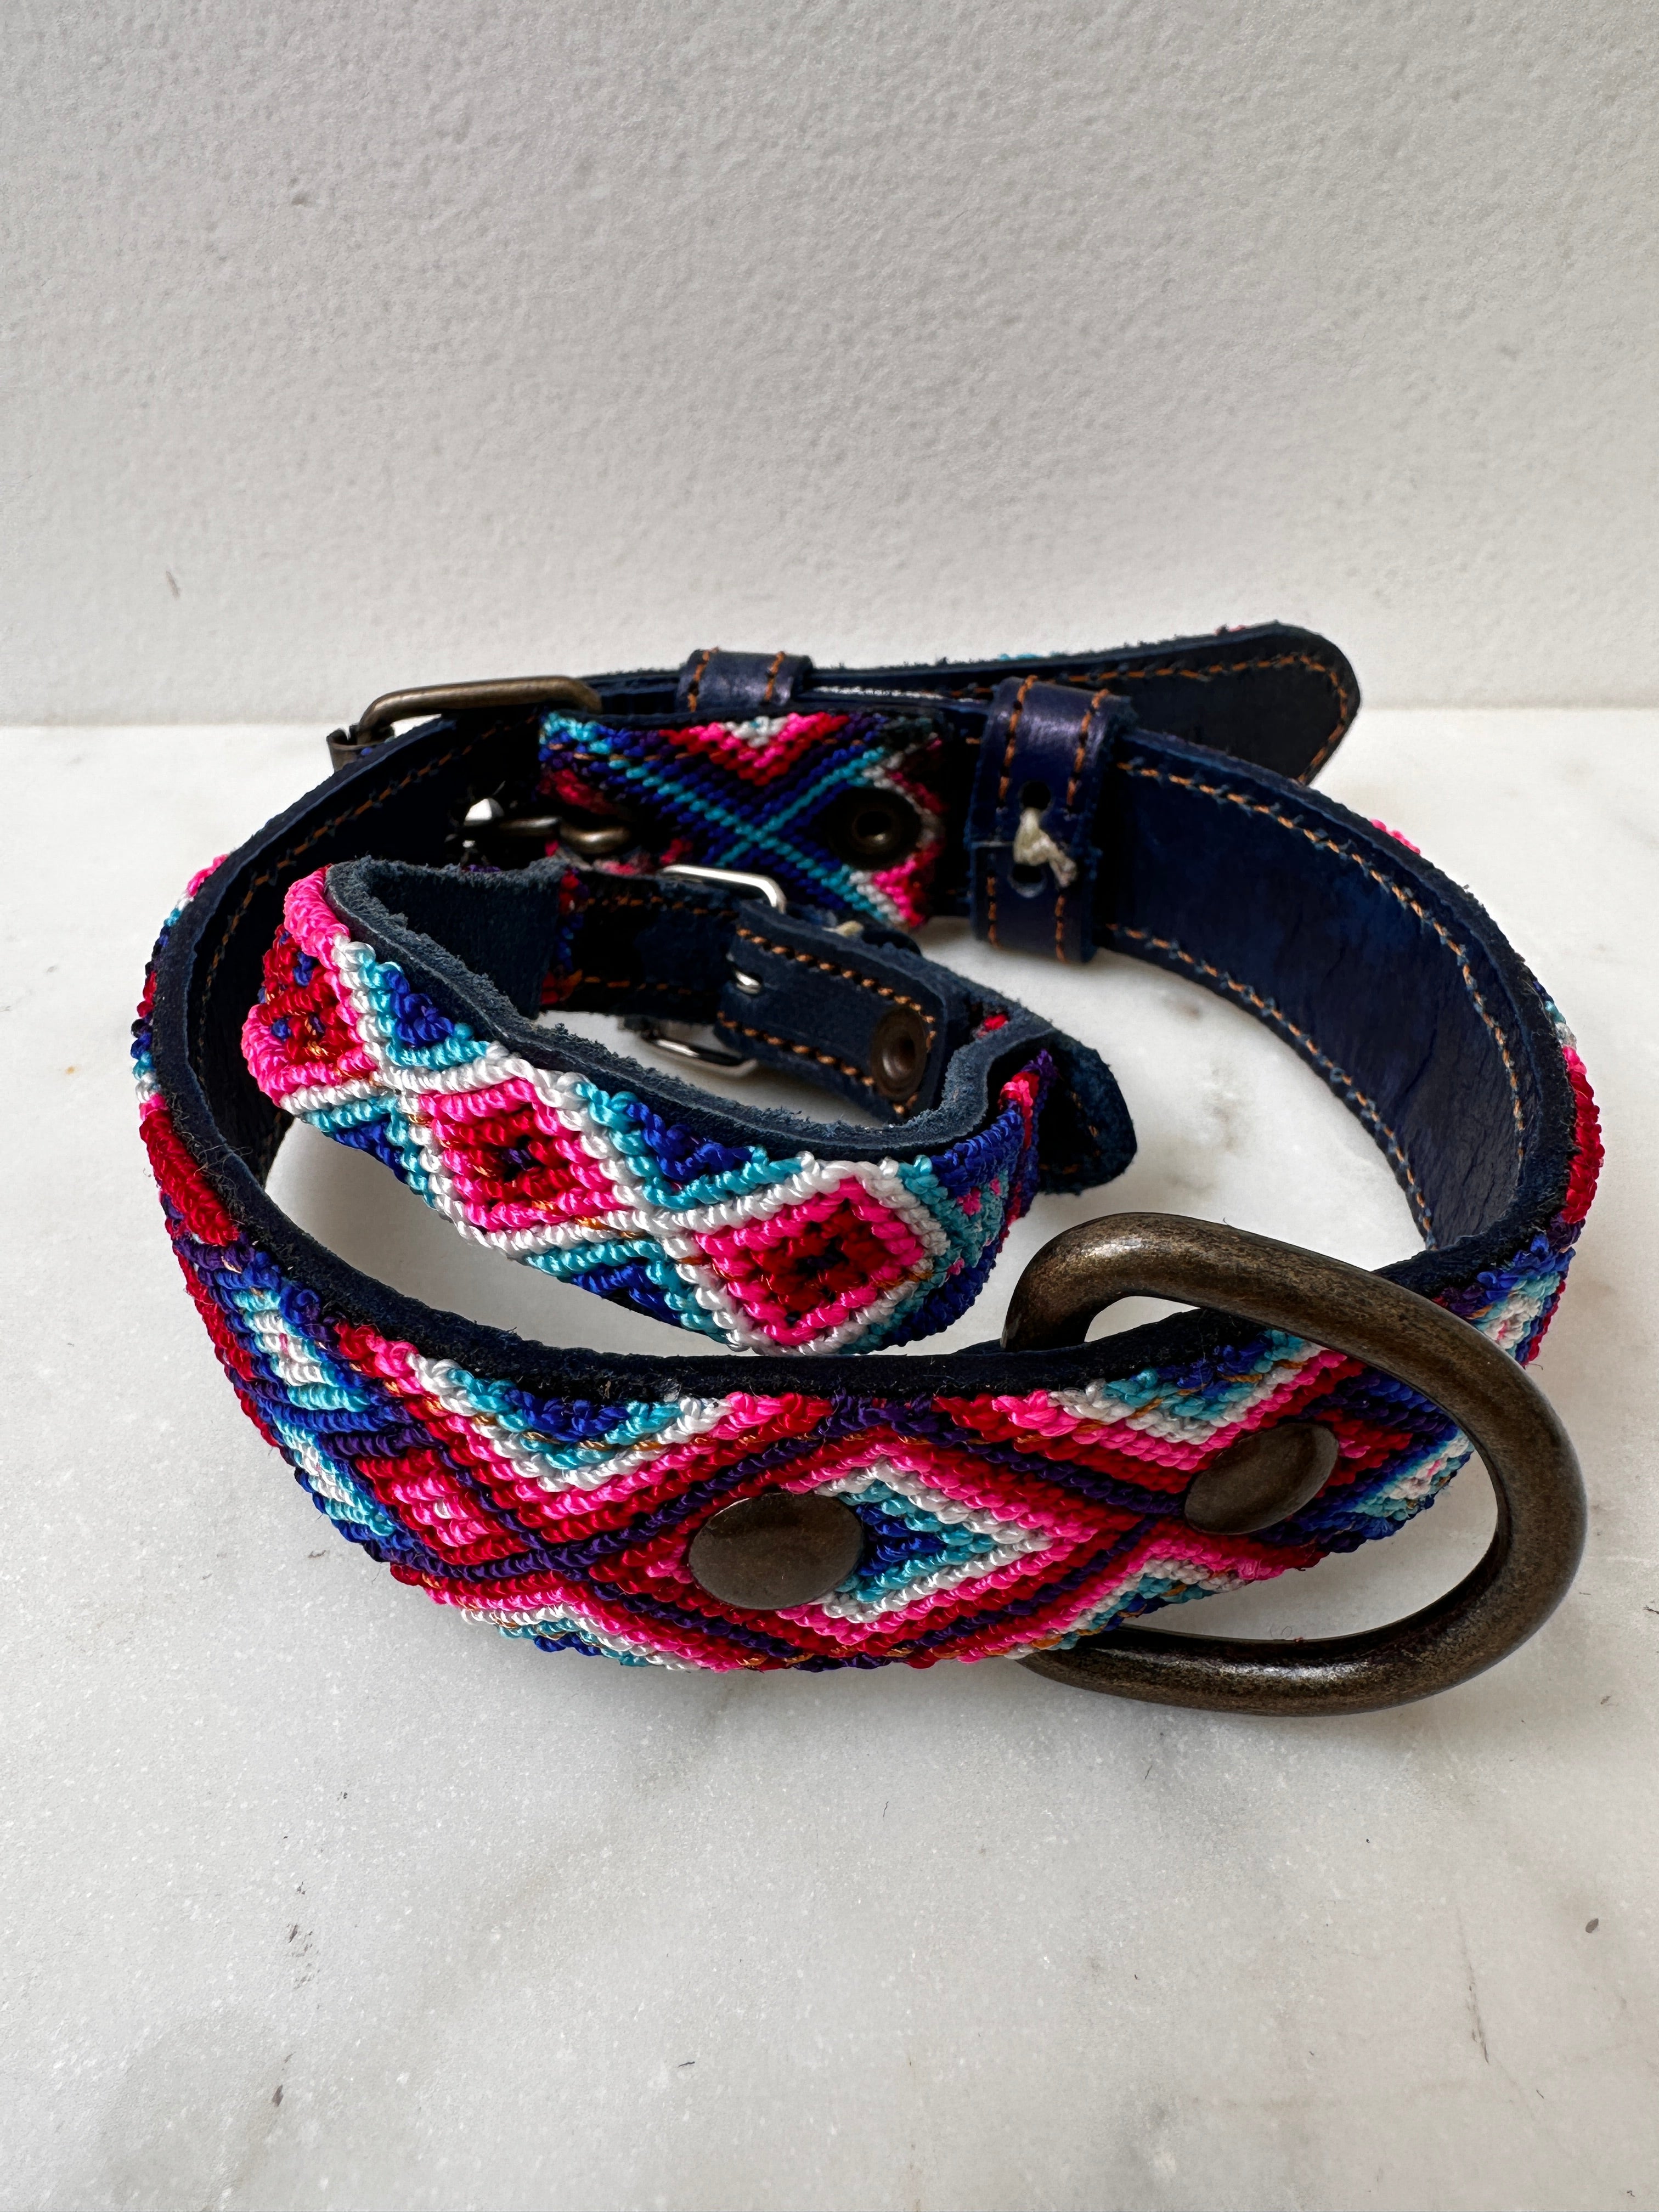 Future Nomads Homewares One Size Huichol Fully Embroidered Dog Collar S8